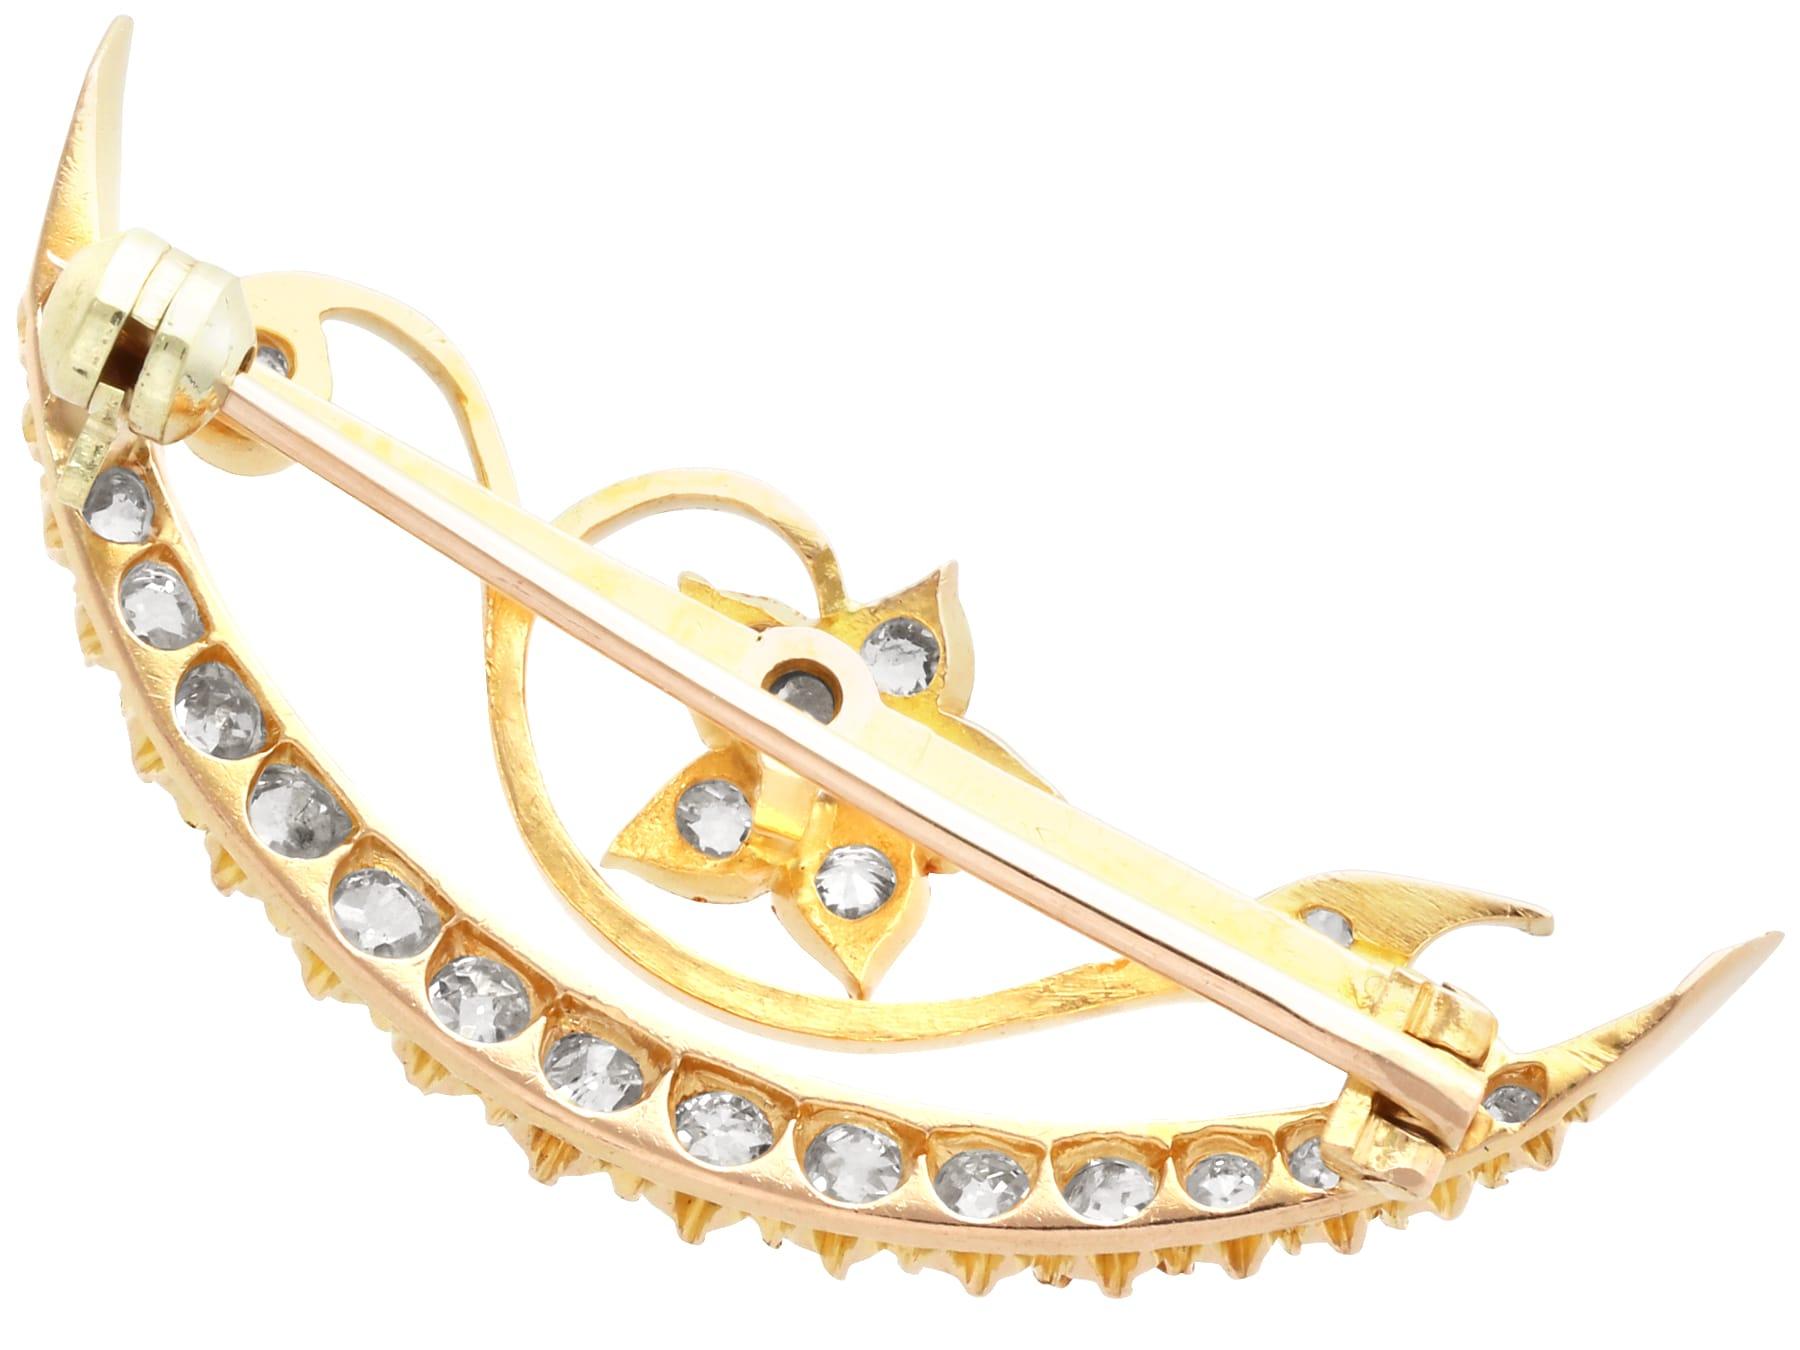 Antique 0.87Ct Diamond and 18k Yellow Gold Brooch Circa 1890 For Sale 1